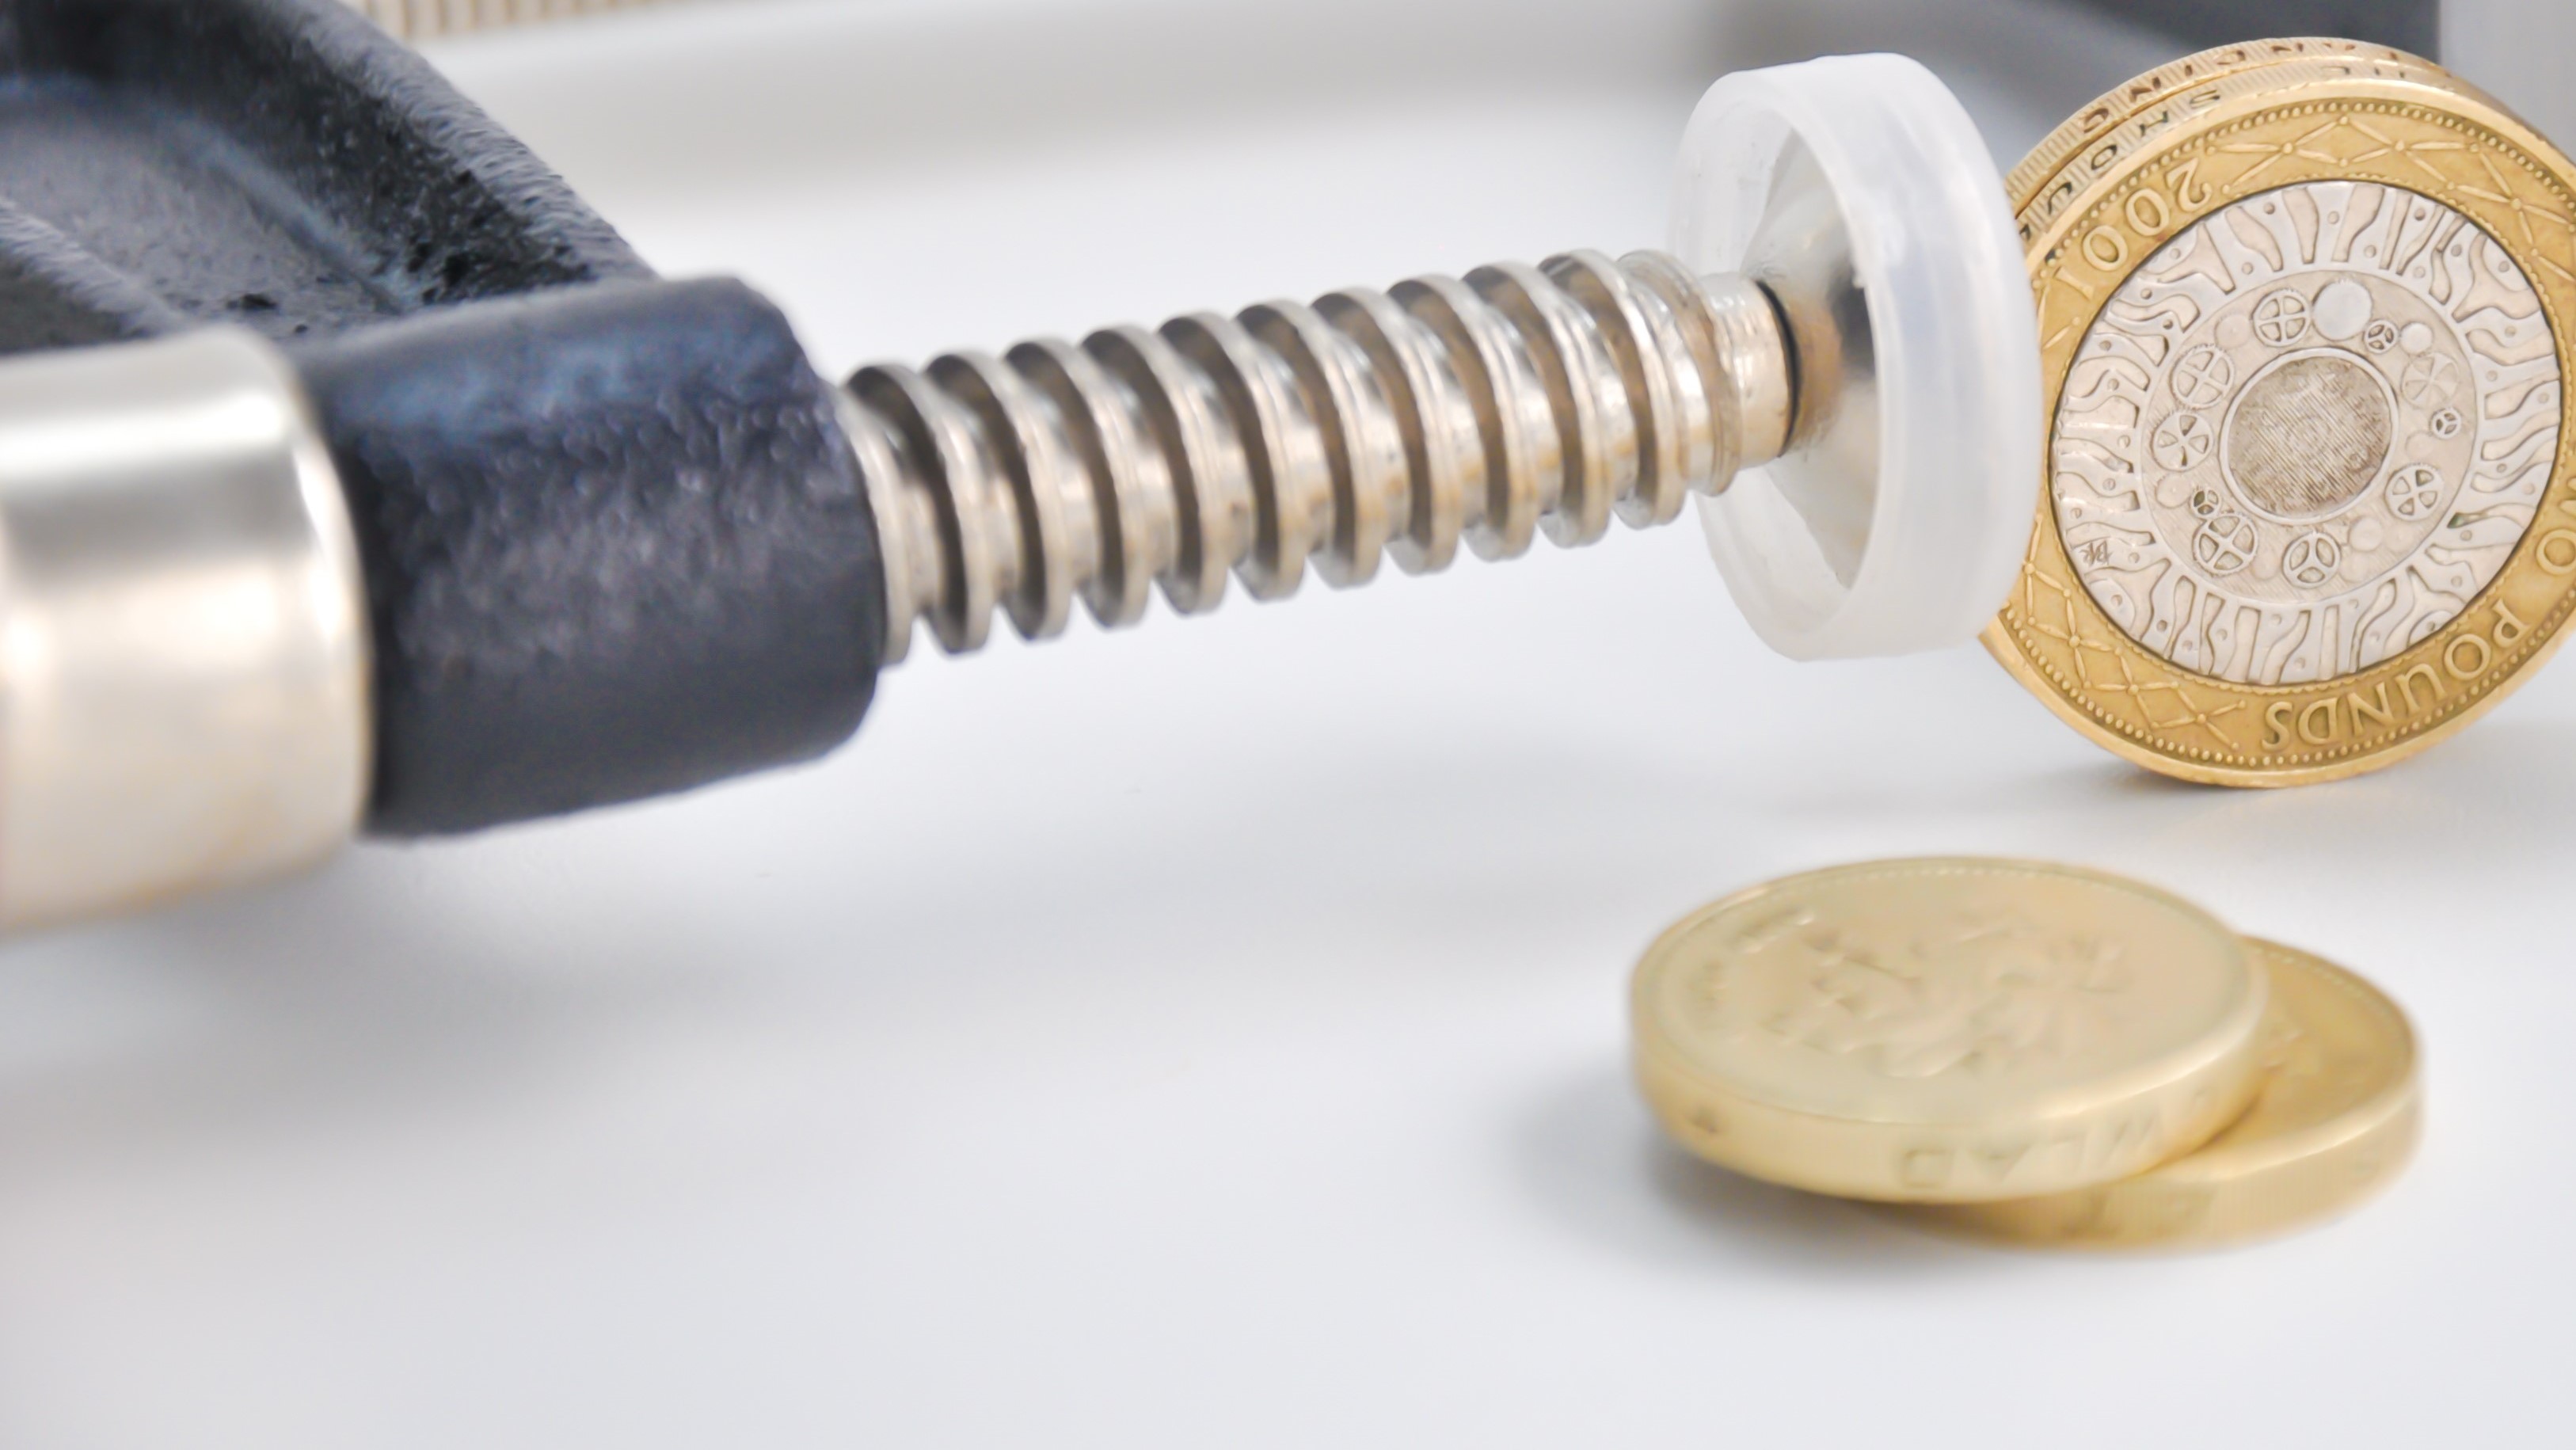 A pound coin is squeezed between a clamp